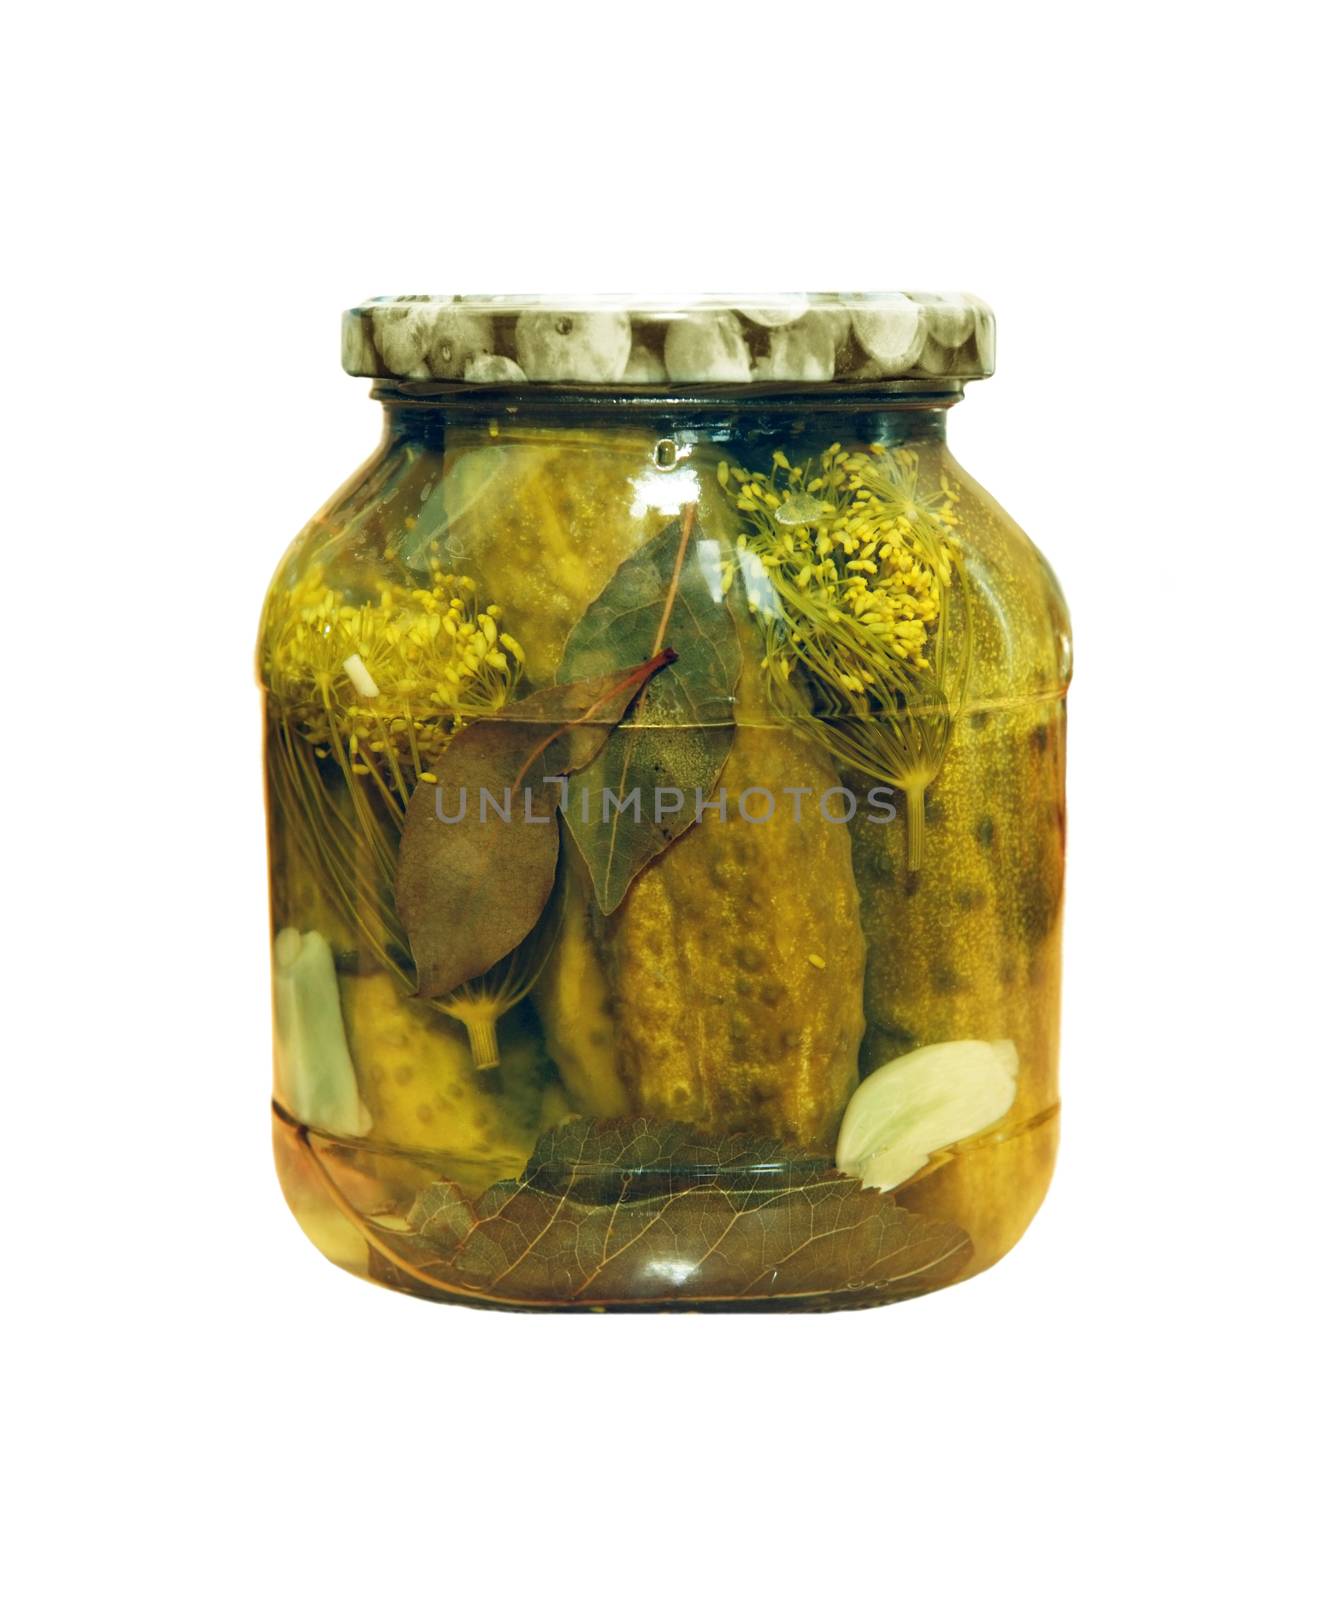 Glass jar of pickled cucumbers isolated on white